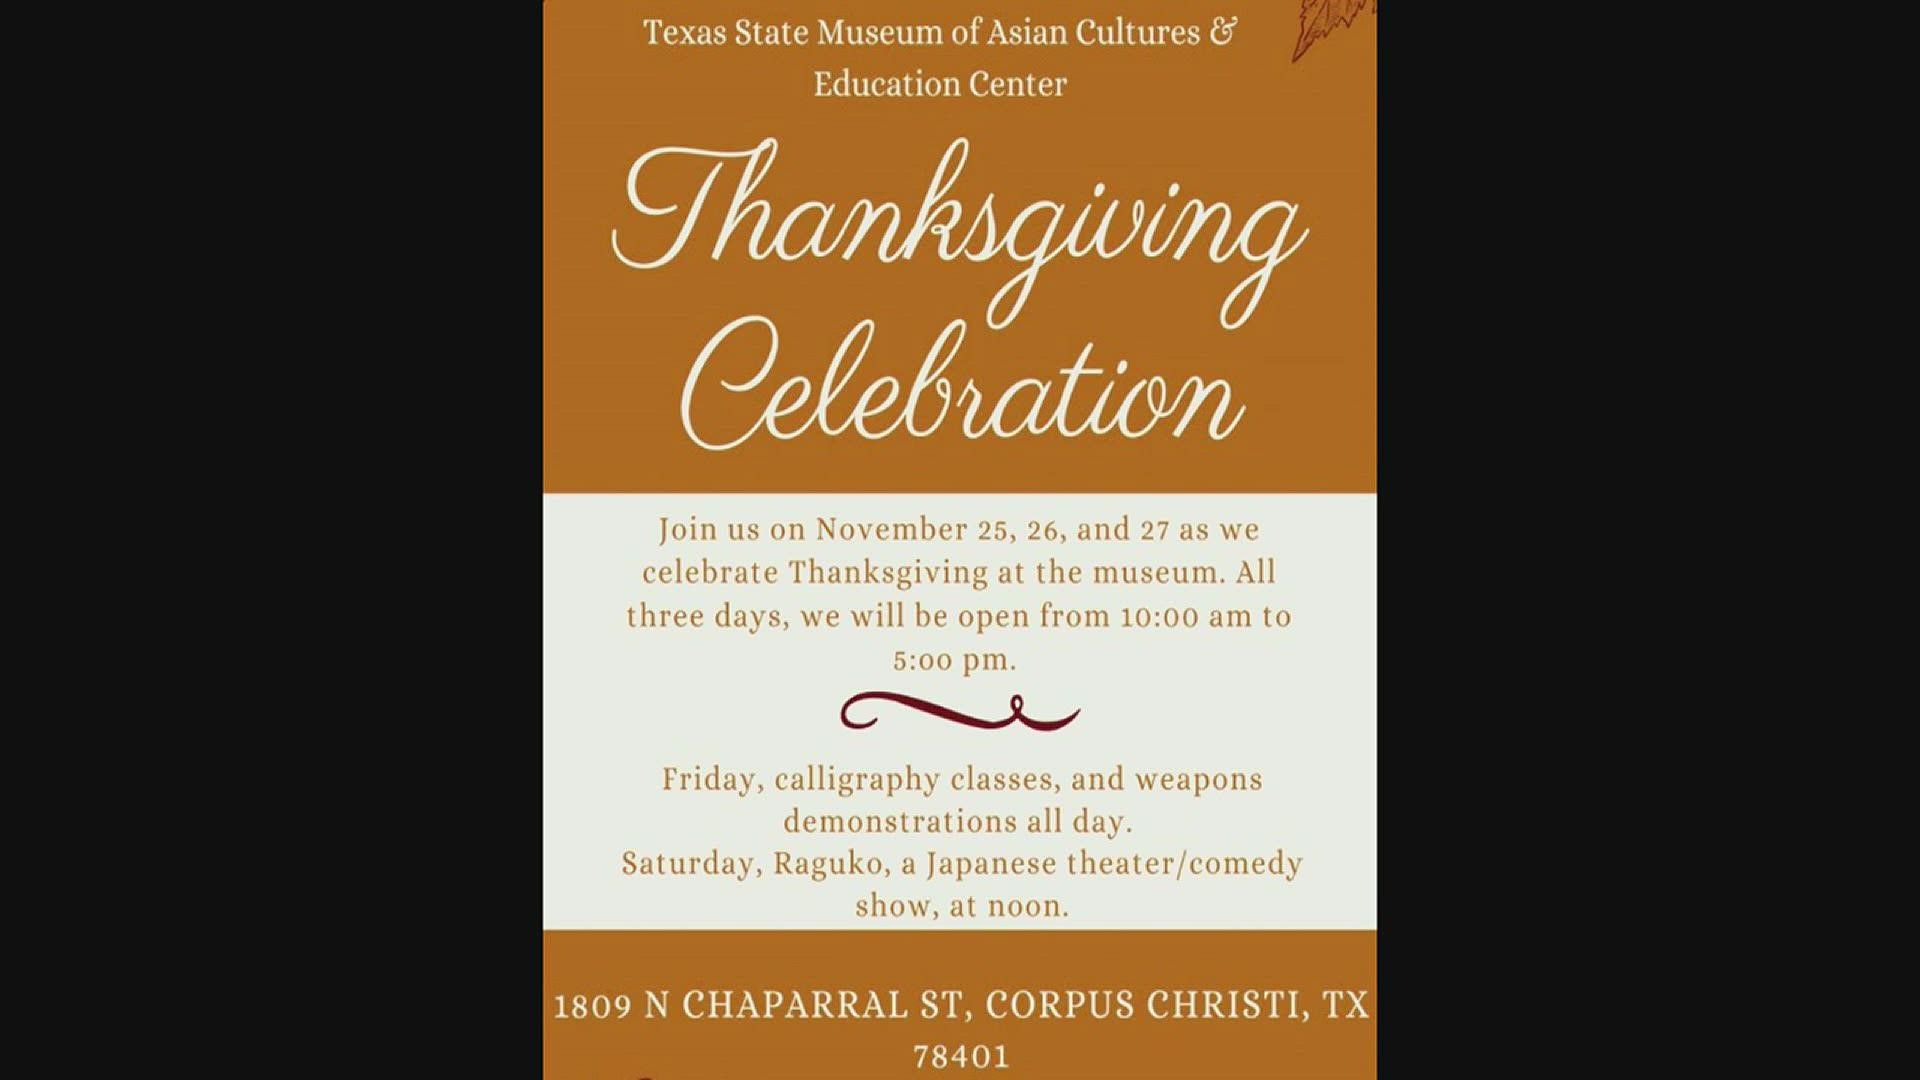 Richard Hafemeister of the Texas State Museum of Asian Cultures joined us live to dish out the details of their upcoming Thanksgiving Celebration.